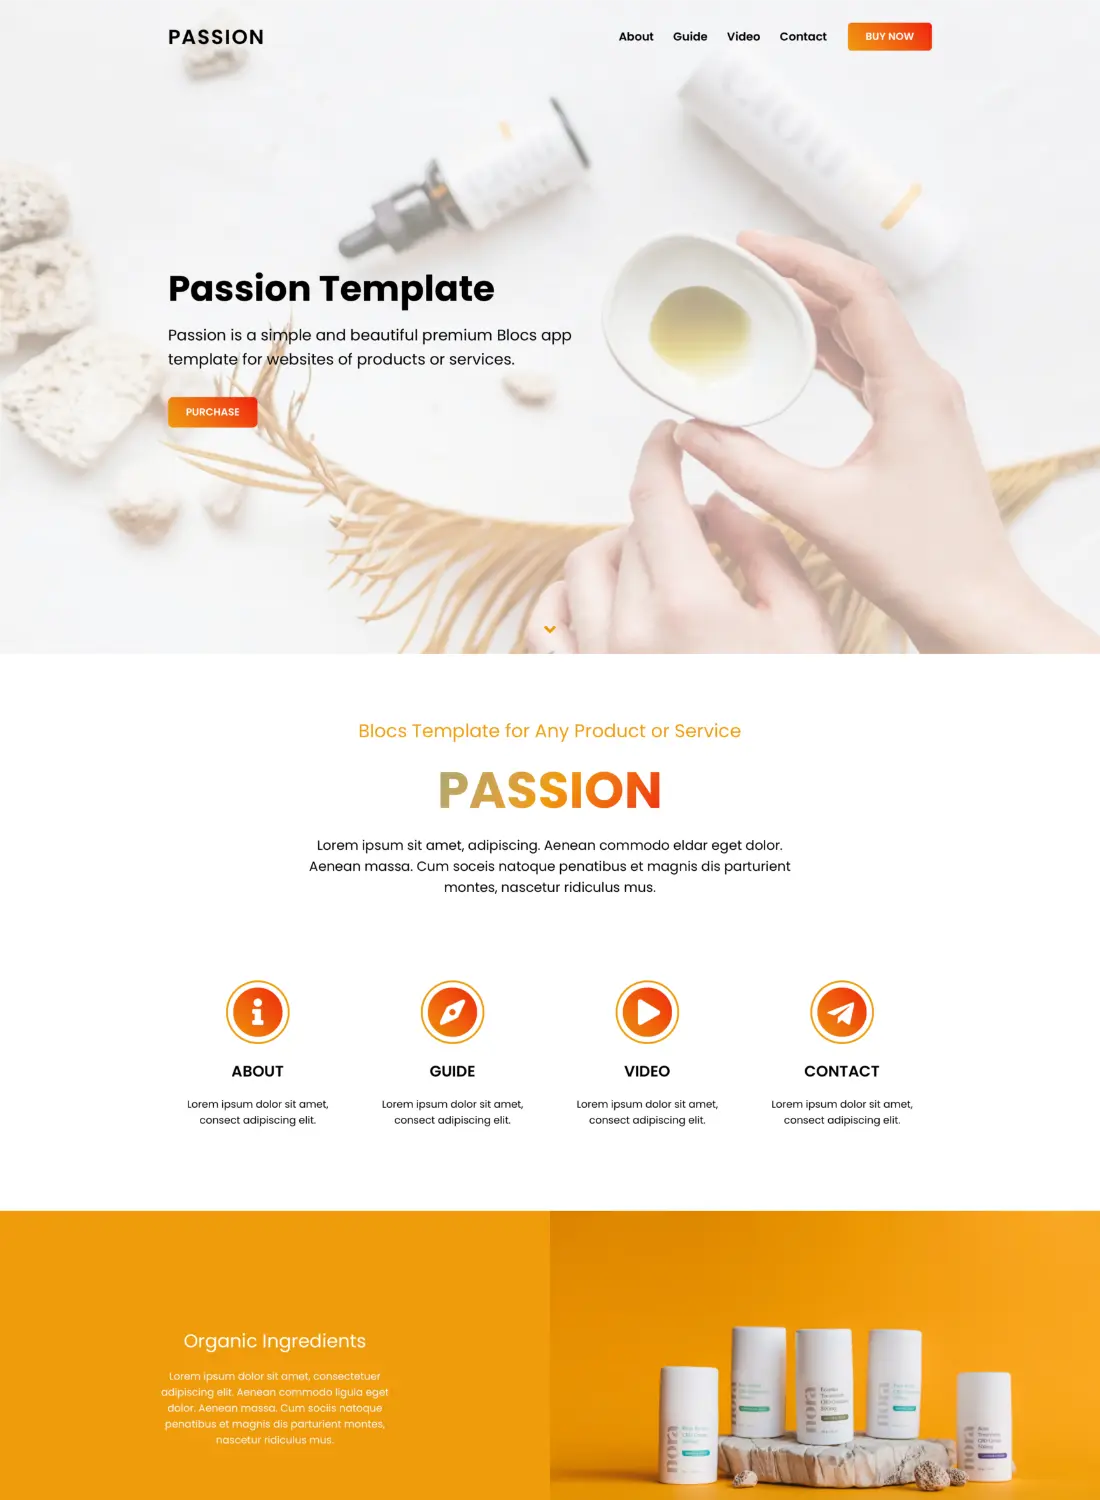 passion product landing page premium free template for blocs 5 website builder